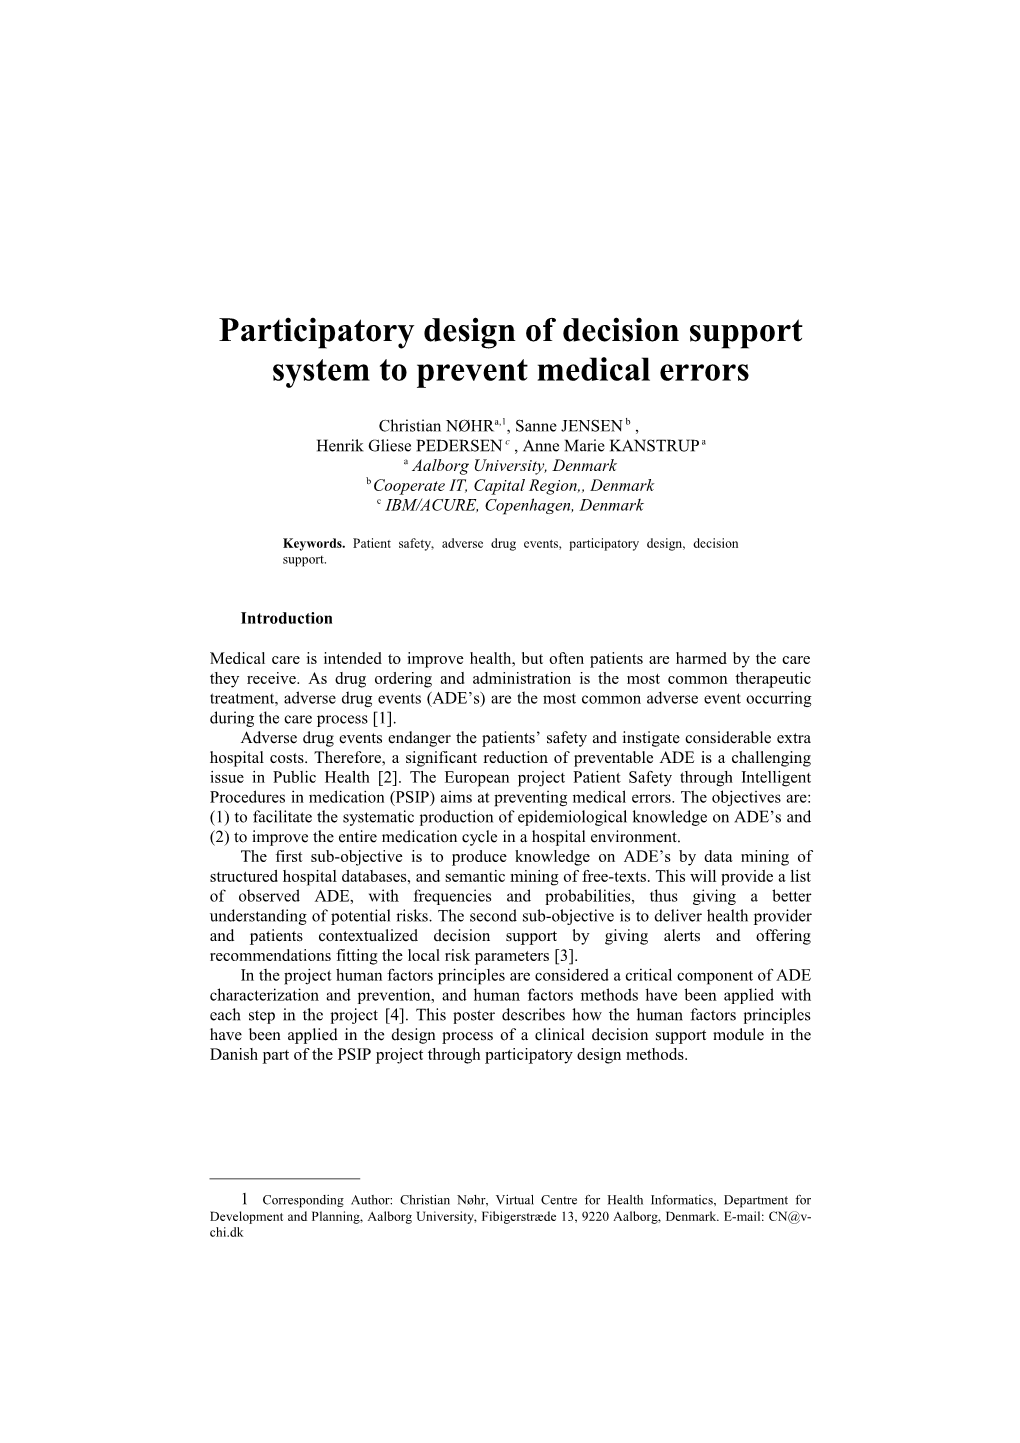 Participatory Design of Decision Support System to Prevent Medical Errors